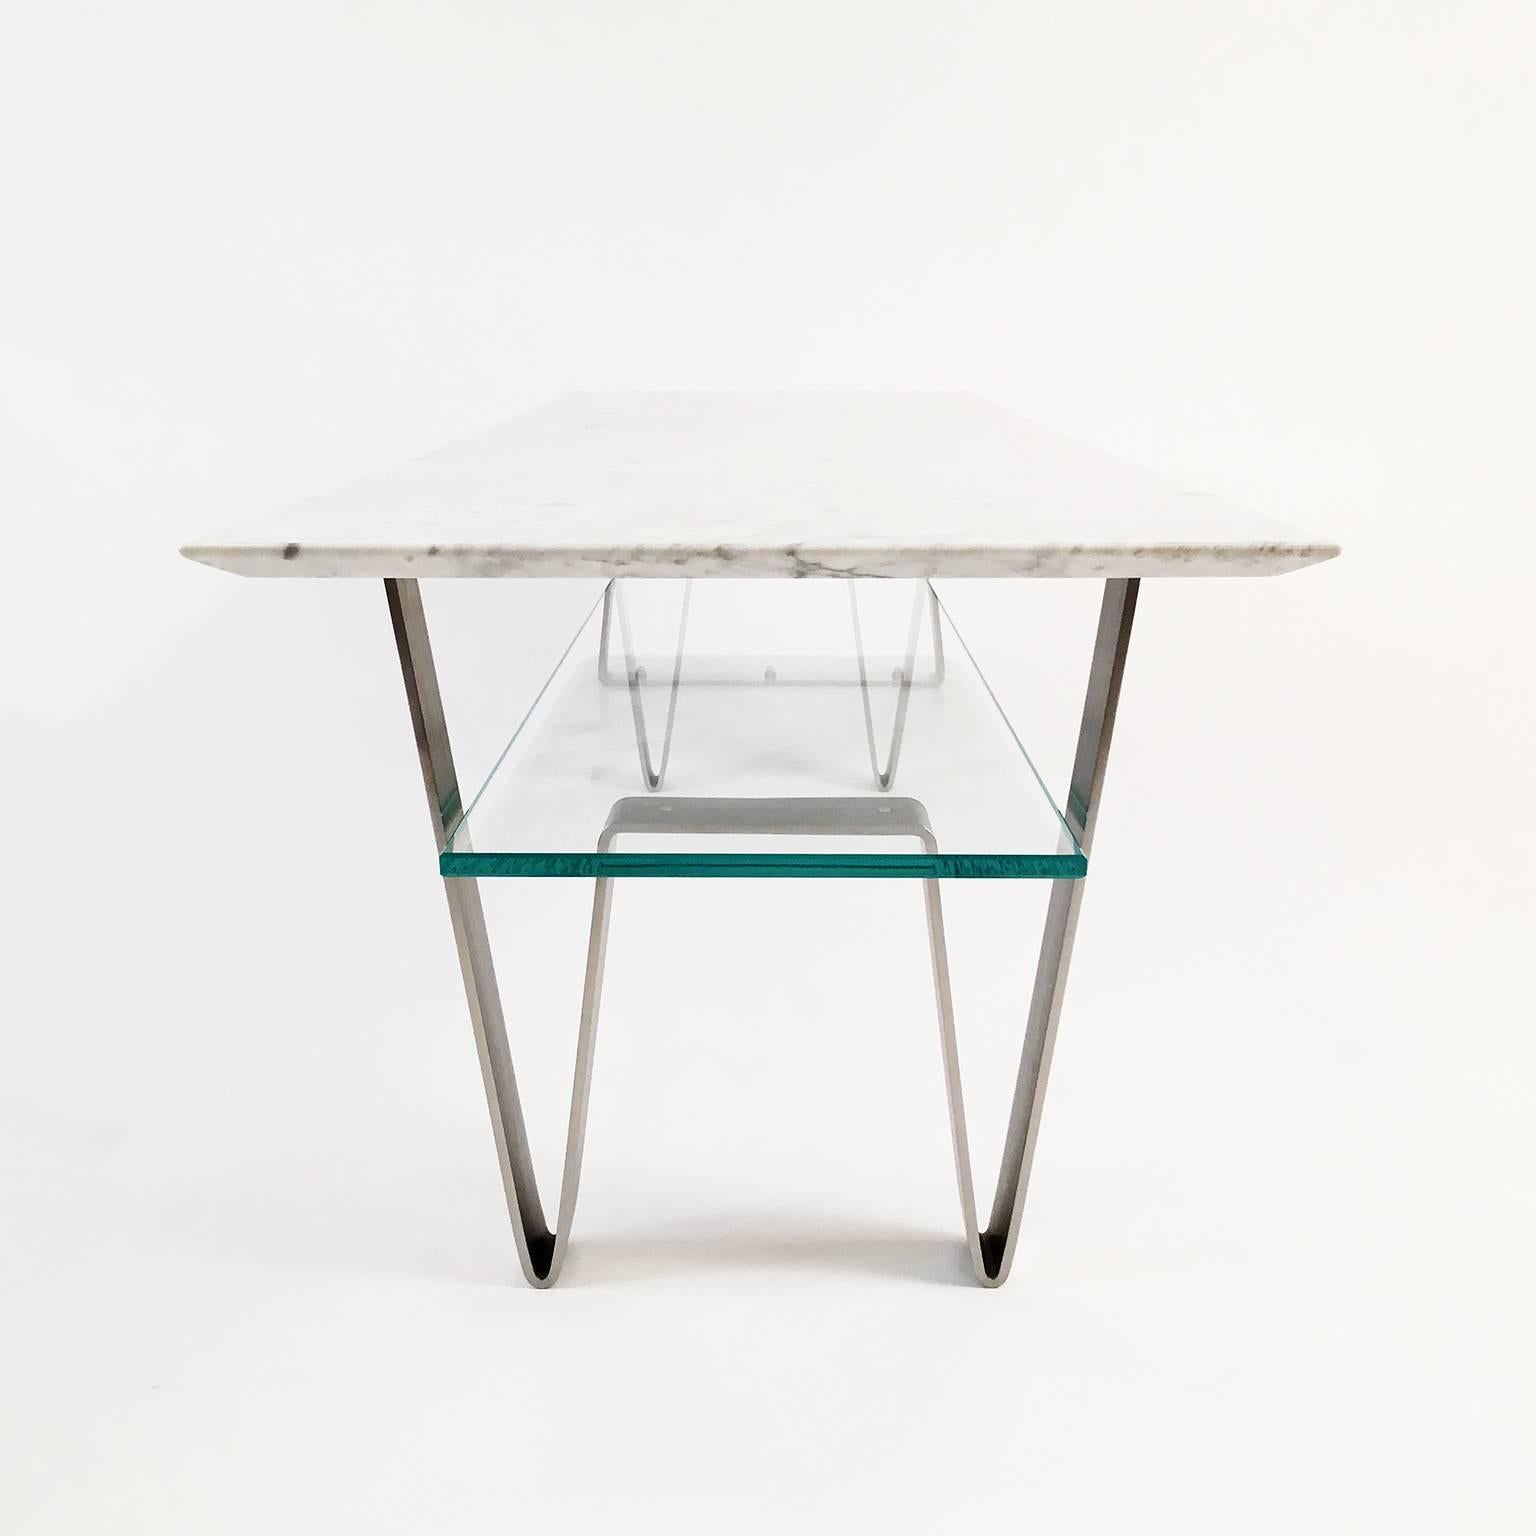 The Zaza table is a showpiece designed with display in mind. A Carrara marble top sits above a glass shelf for the presentation of books or objects. Both the marble and glass are supported by bent stainless steel hairpin legs - a contemporary nod to